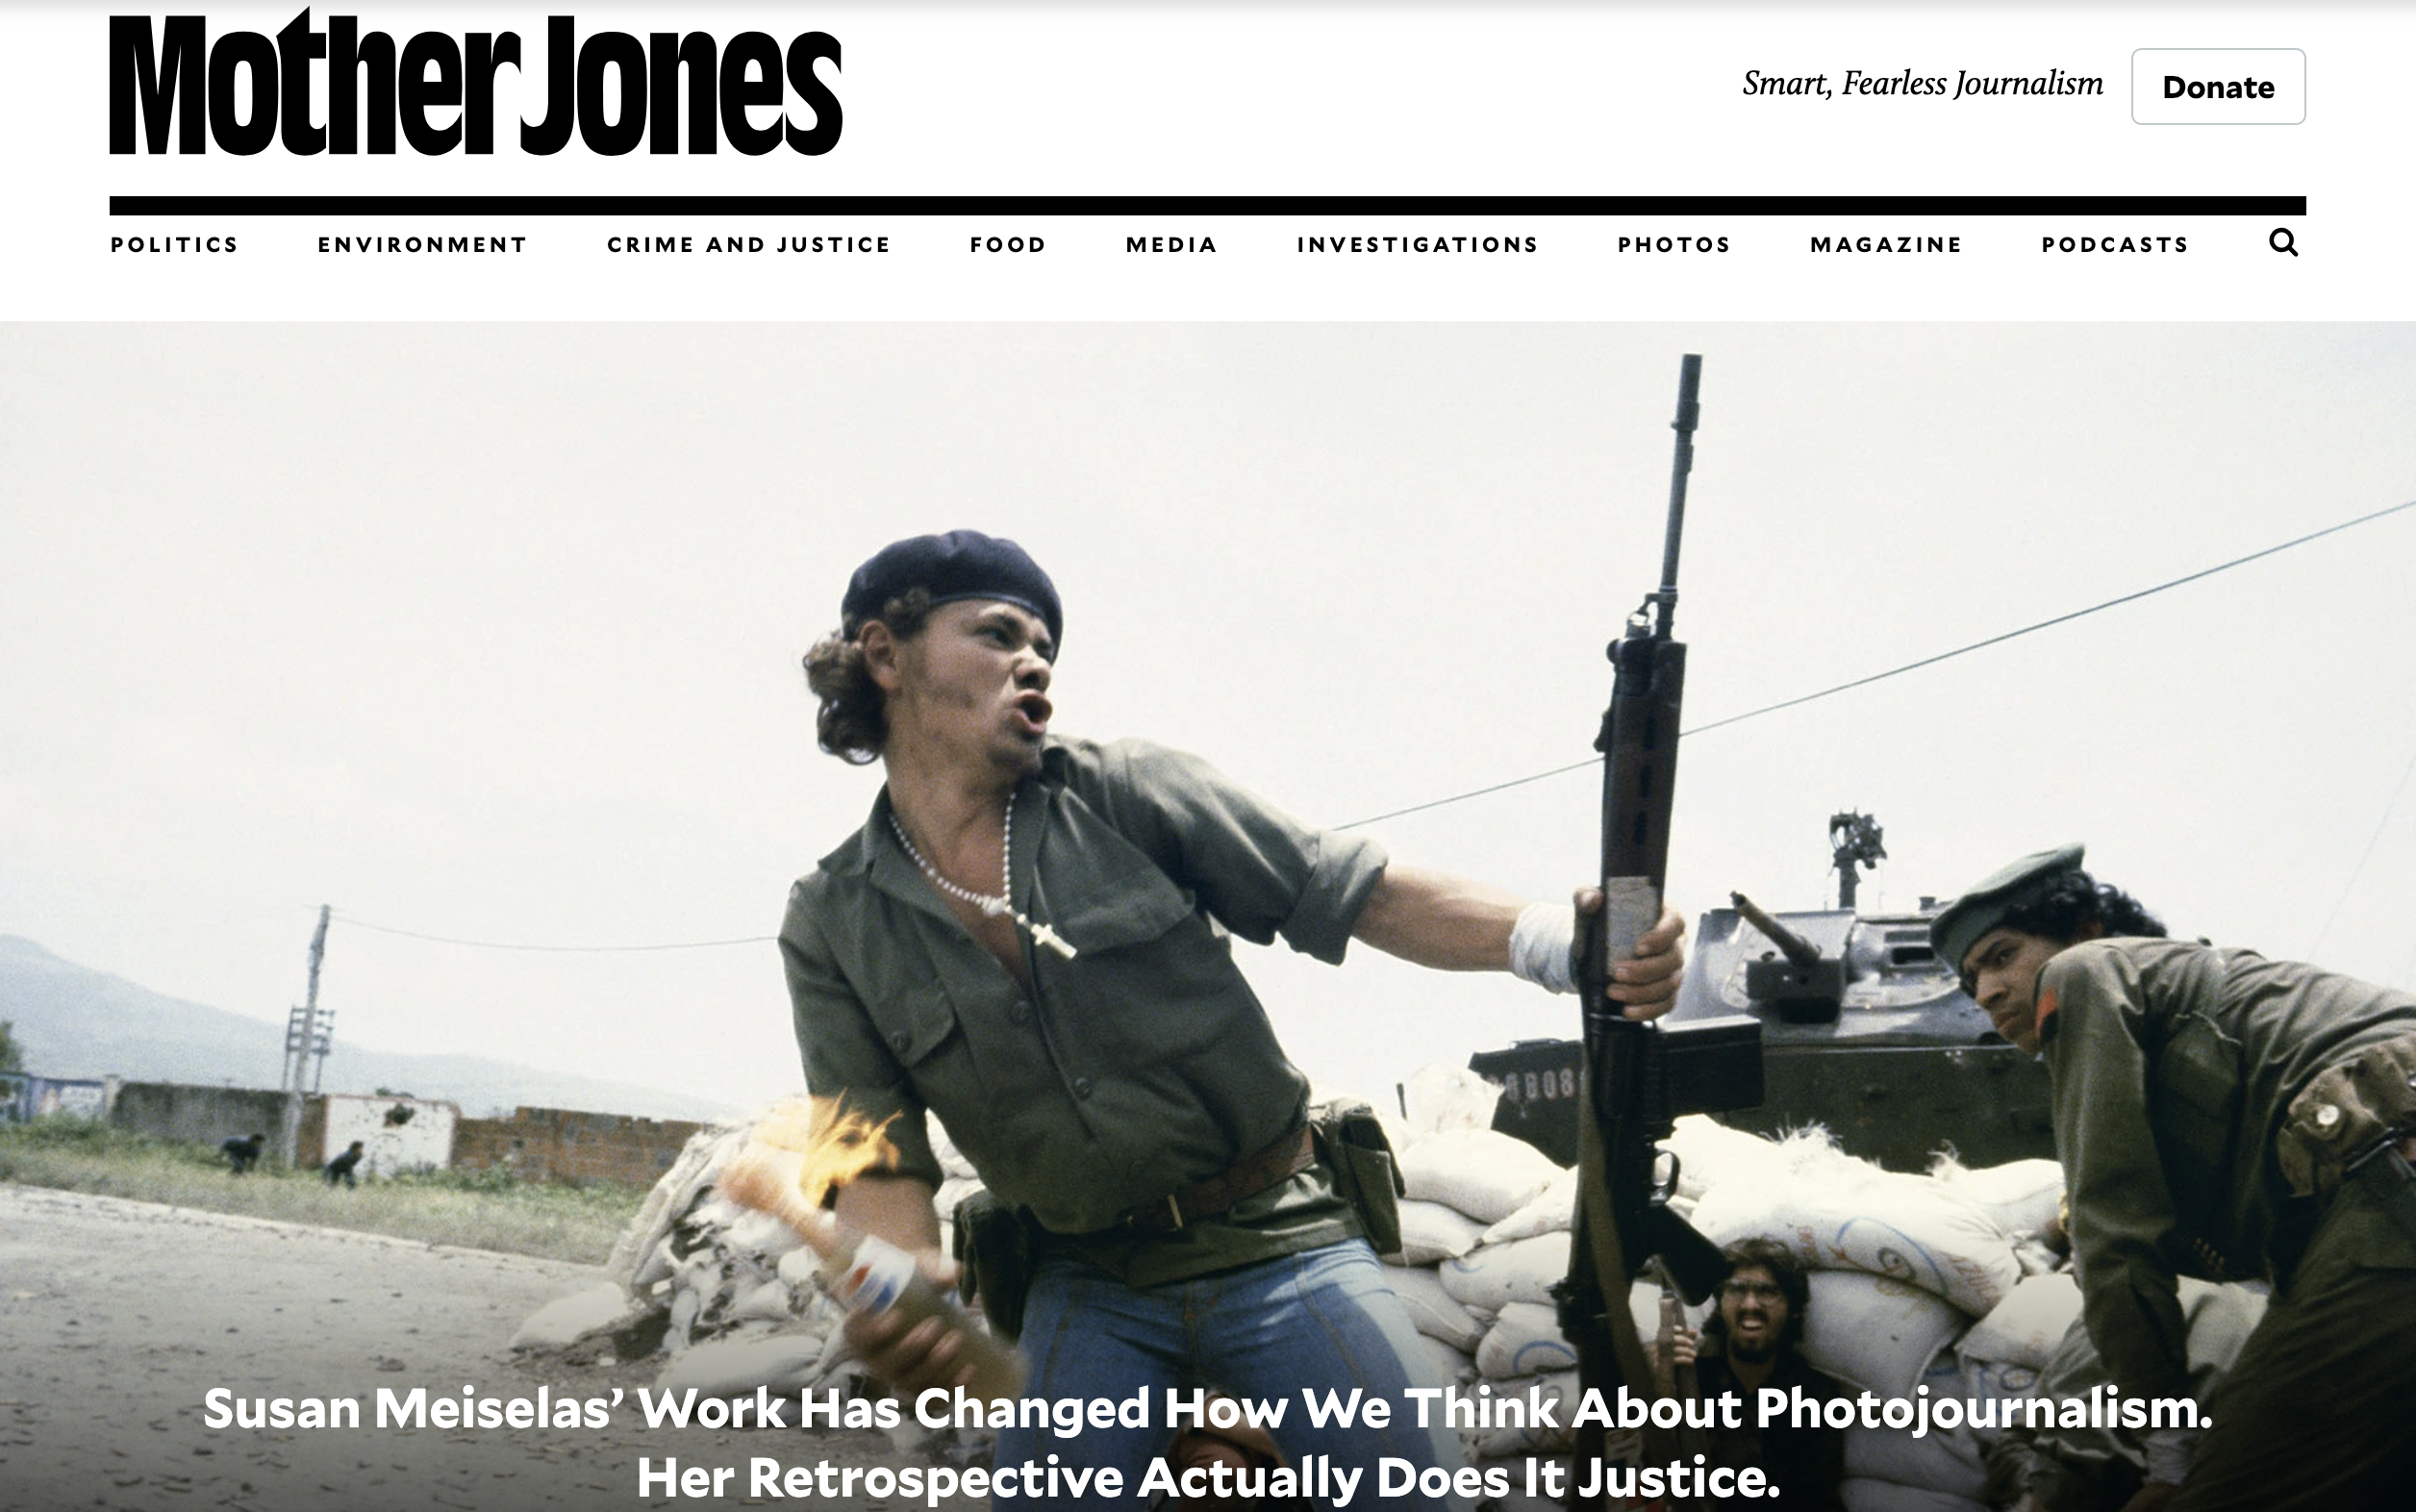 MotherJones: Susan Meiselas’ Work Has Changed How We Think About Photojournalism. Her Retrospective Actually Does It Justice.